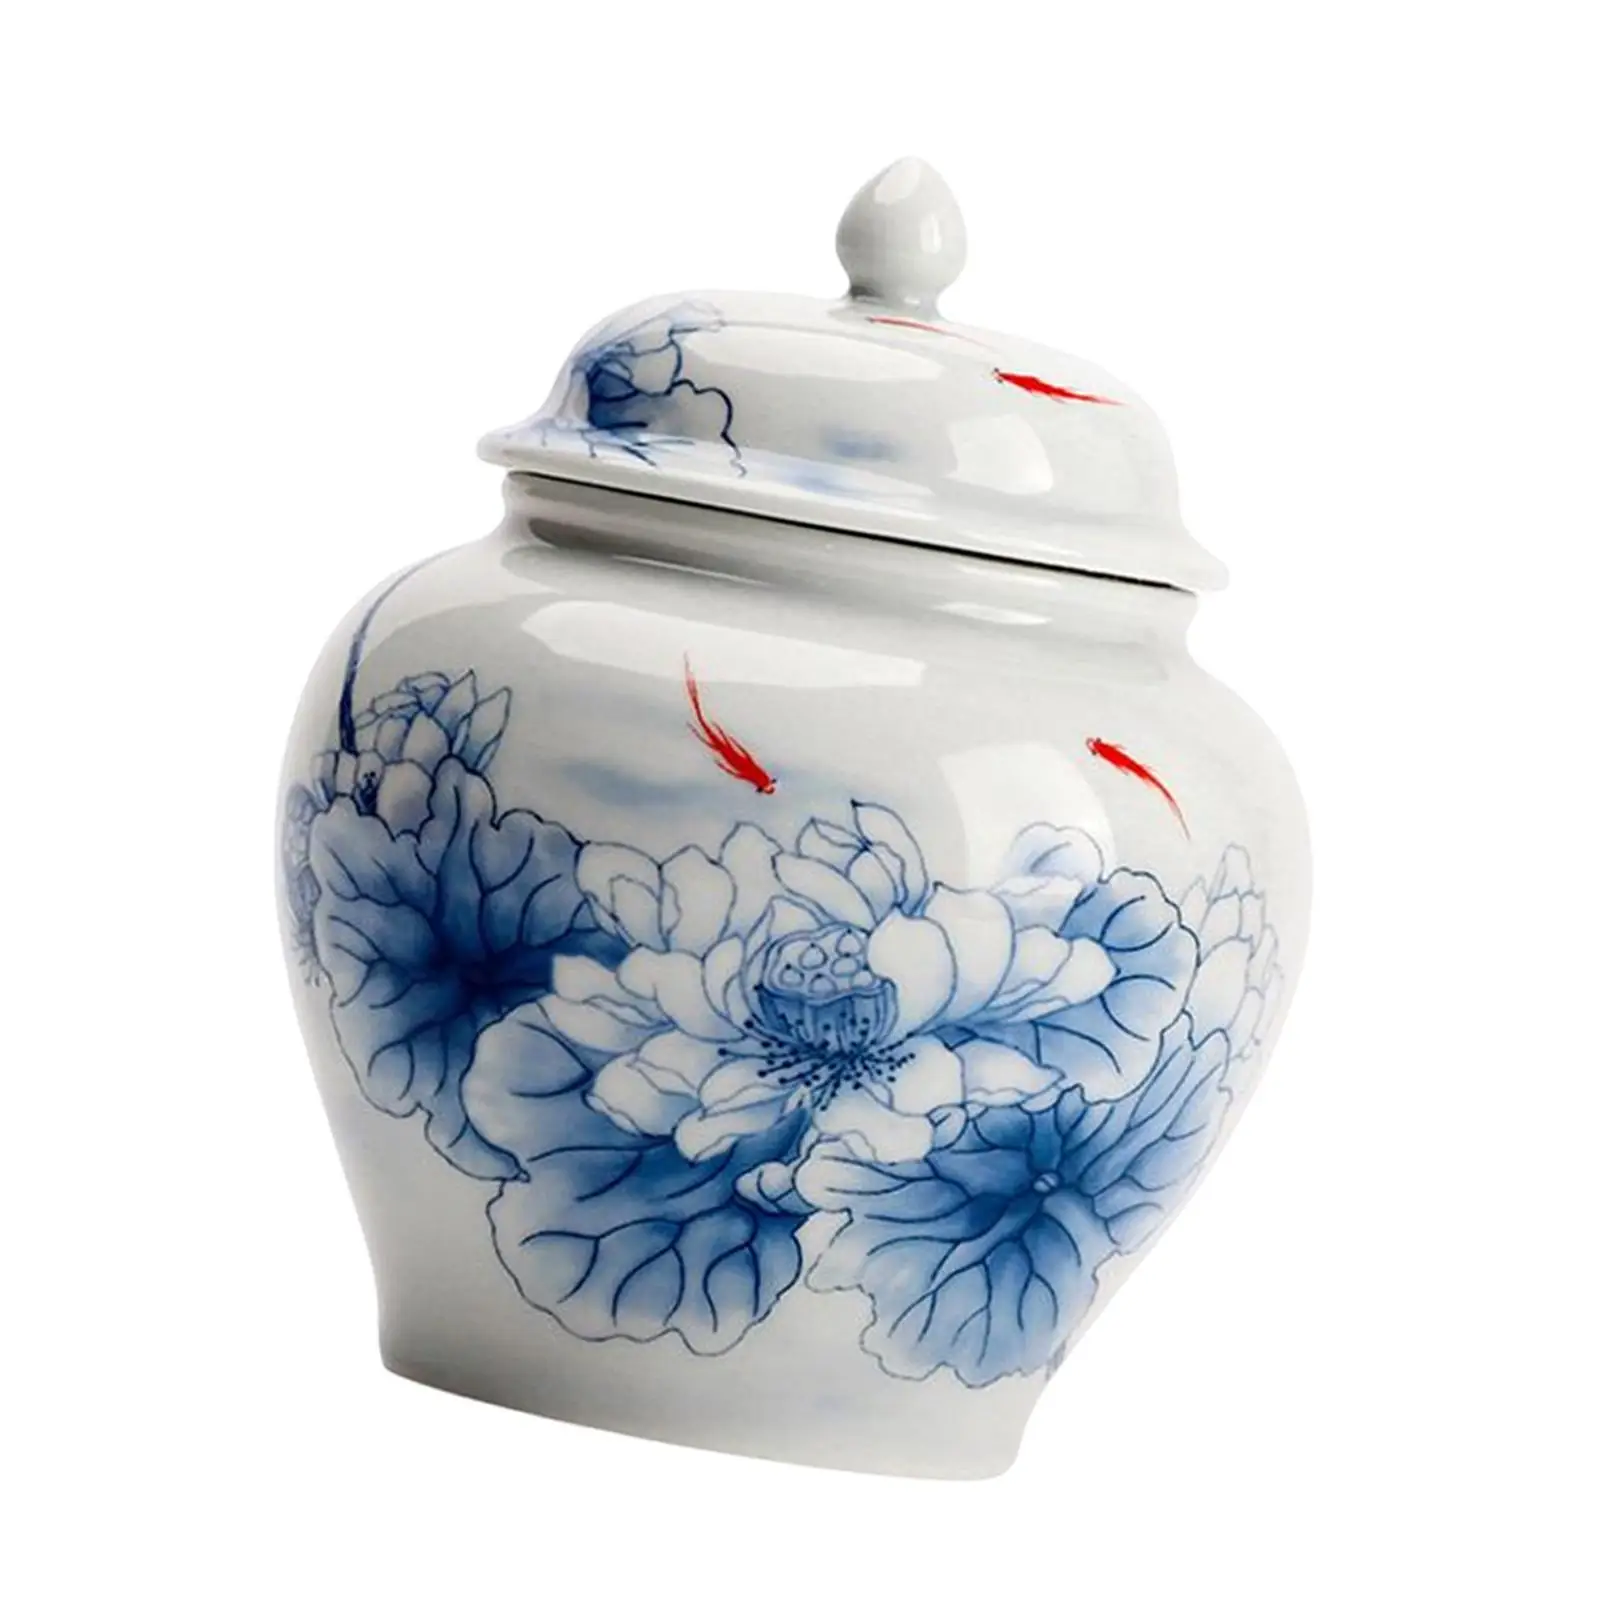 Blue and White Porcelain Ginger Jar with Lid Bud Vase Temple Jar Food Storage Container Tea Caddy Traditional Home Decoration